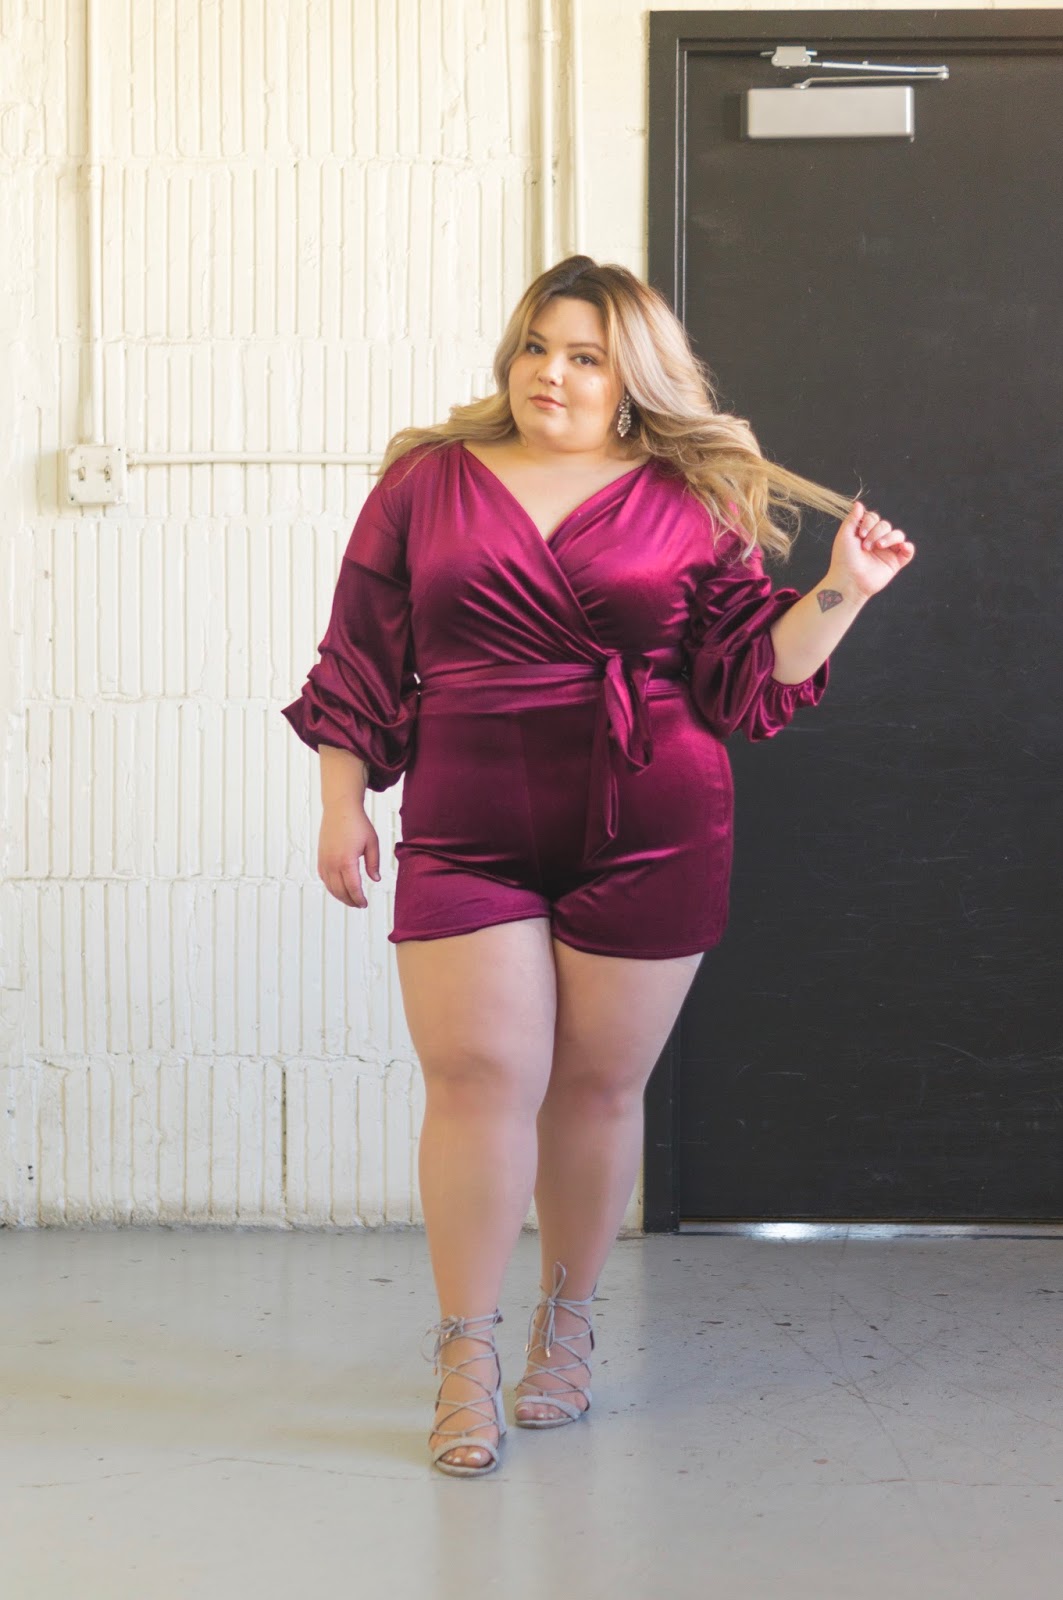 natalie in the city, natalie craig, plus size fashion blogger, Chicago fashion blogger, plus size fashion, affordable plus size clothing, embrace your curves, off your beauty standards. body positive, curves and confidence, fashion nova, fashion nova curve, velvet romper